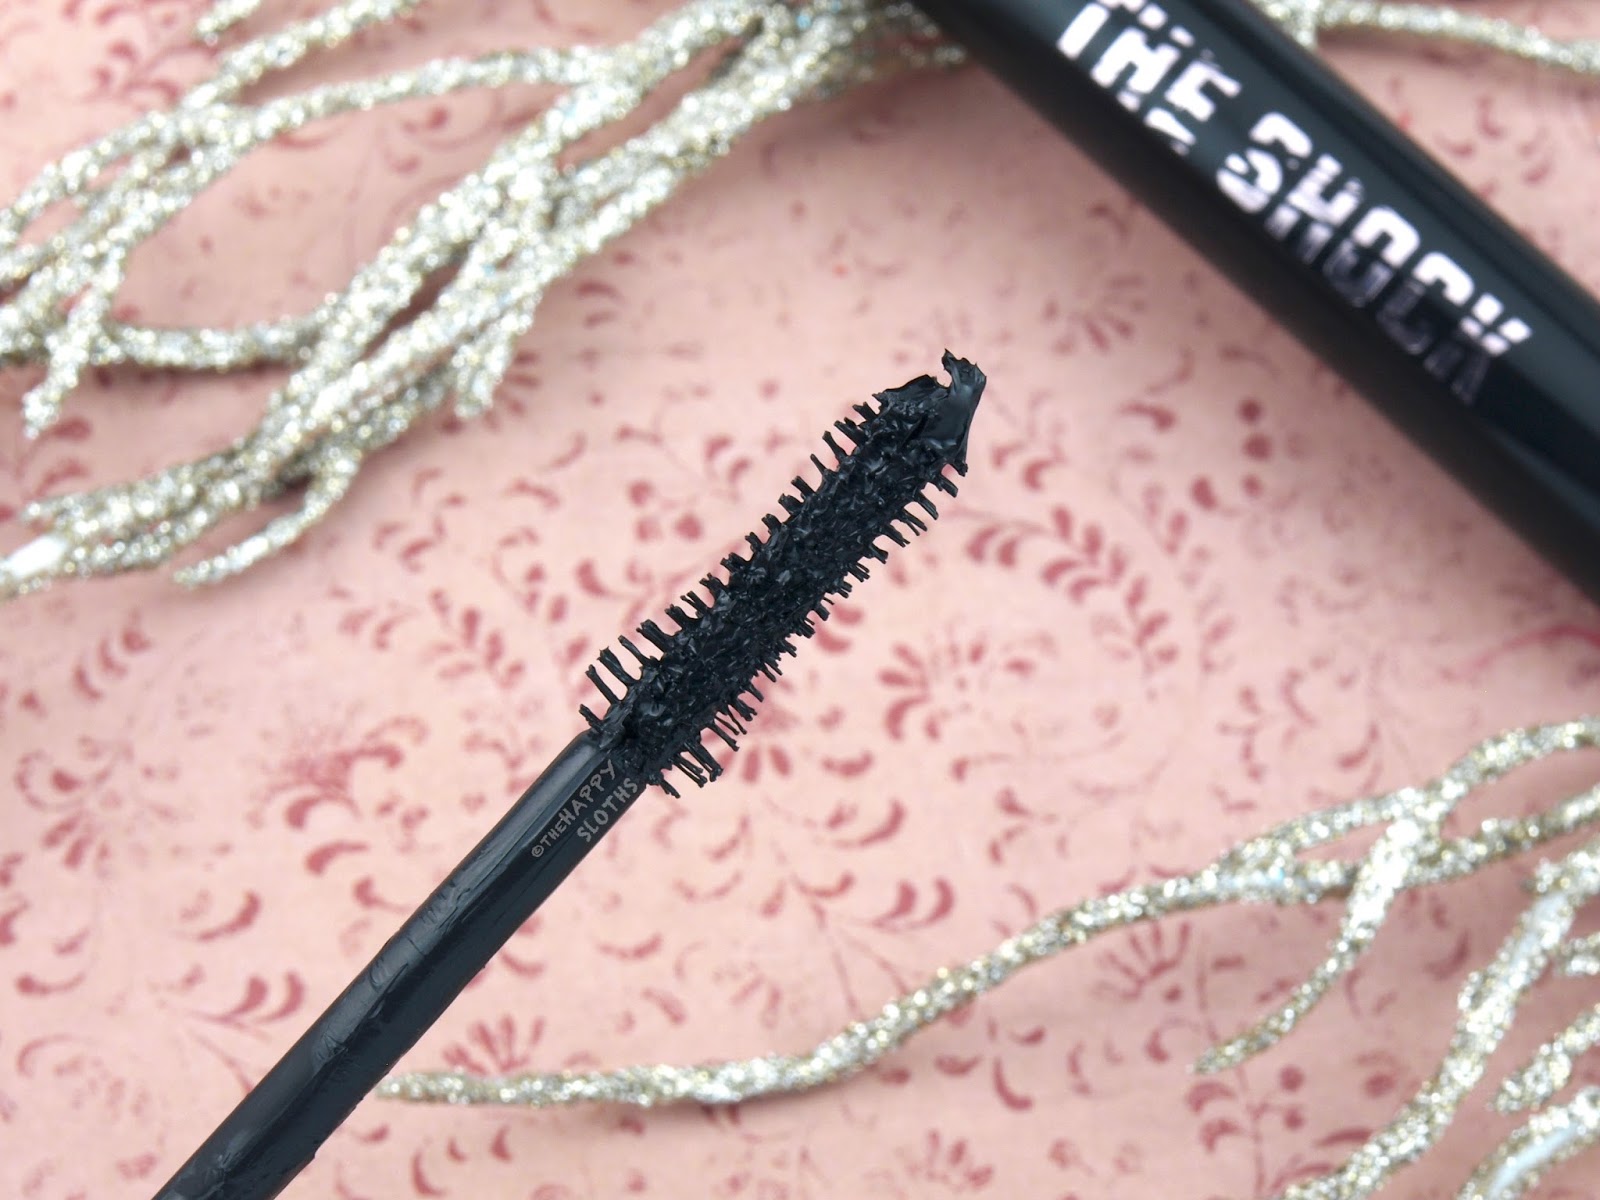 Yves Saint Laurent The Shock Volumizing Mascara: Review and Swatches | The Happy Sloths: Beauty, Makeup, Skincare Blog with Reviews and Swatches